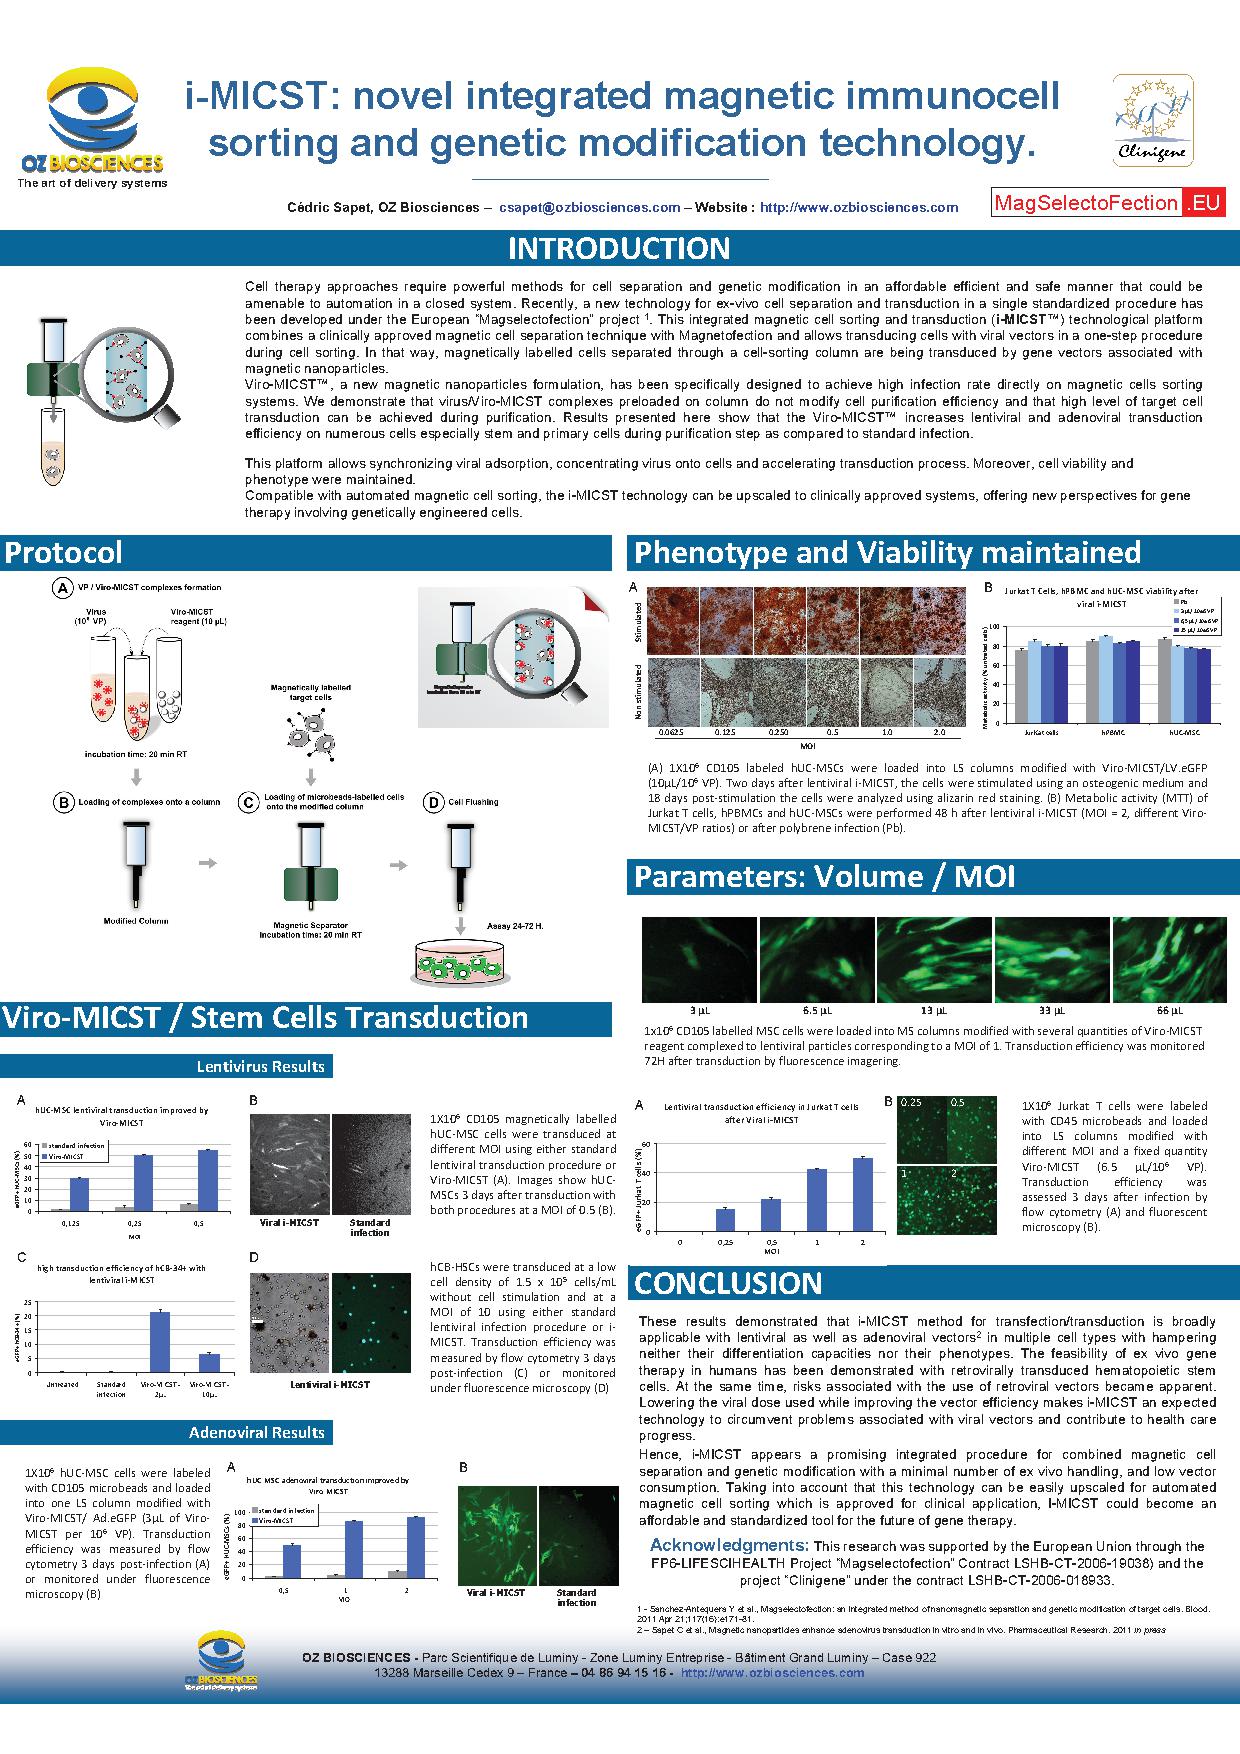 i-MICST: novel integrated magnetic immunocell sorting and genetic modification technology